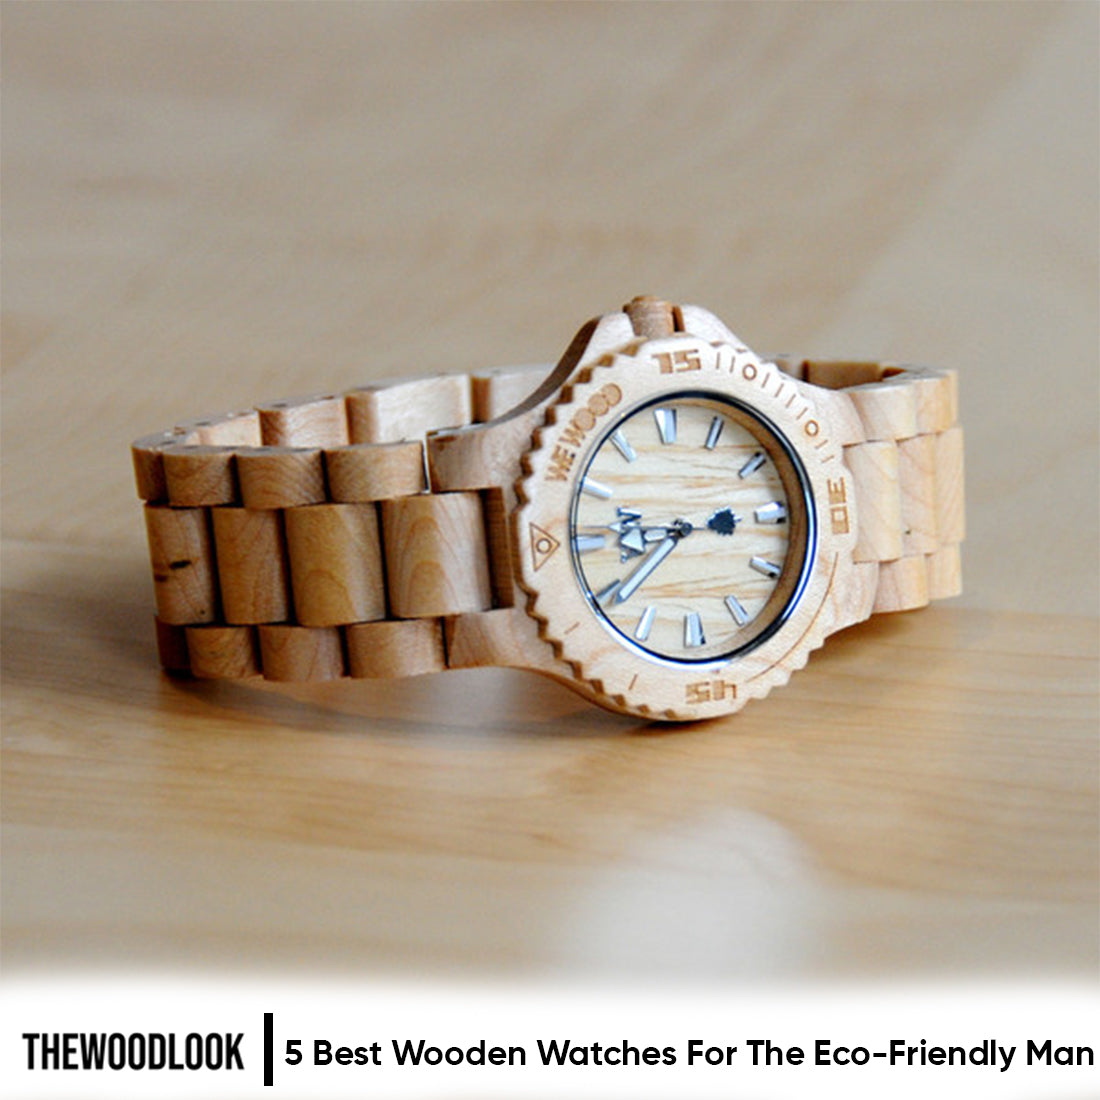 5 Best Wooden Watches for the Eco-Friendly Man